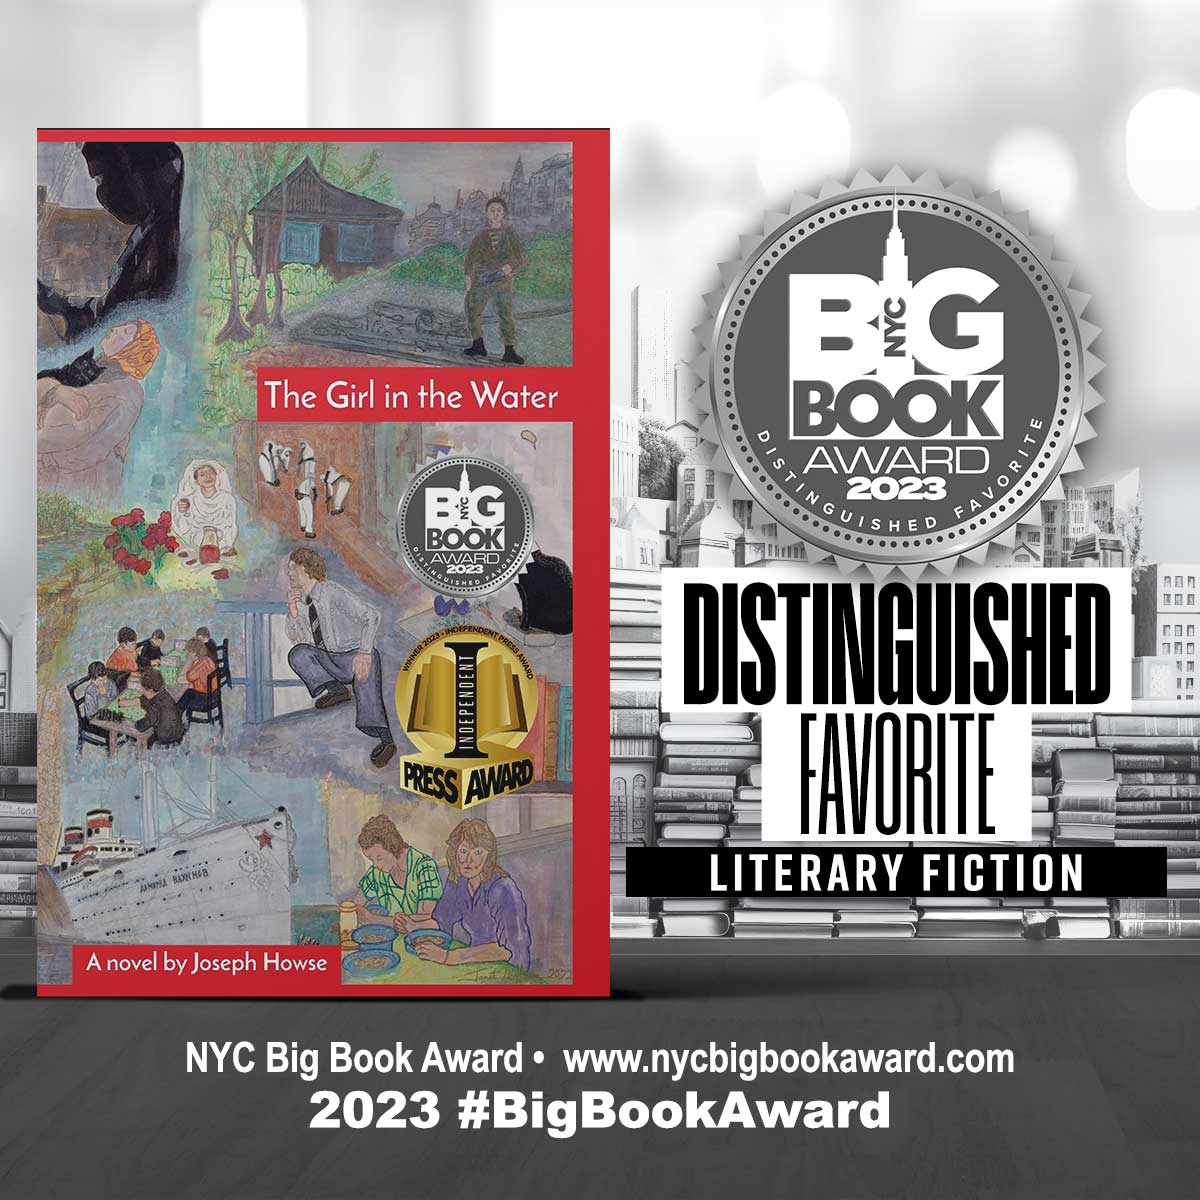 Book cover of The Girl in the Water, by Joseph Howse, with its badge as an NYC Big Book Award Distinguished Favorite